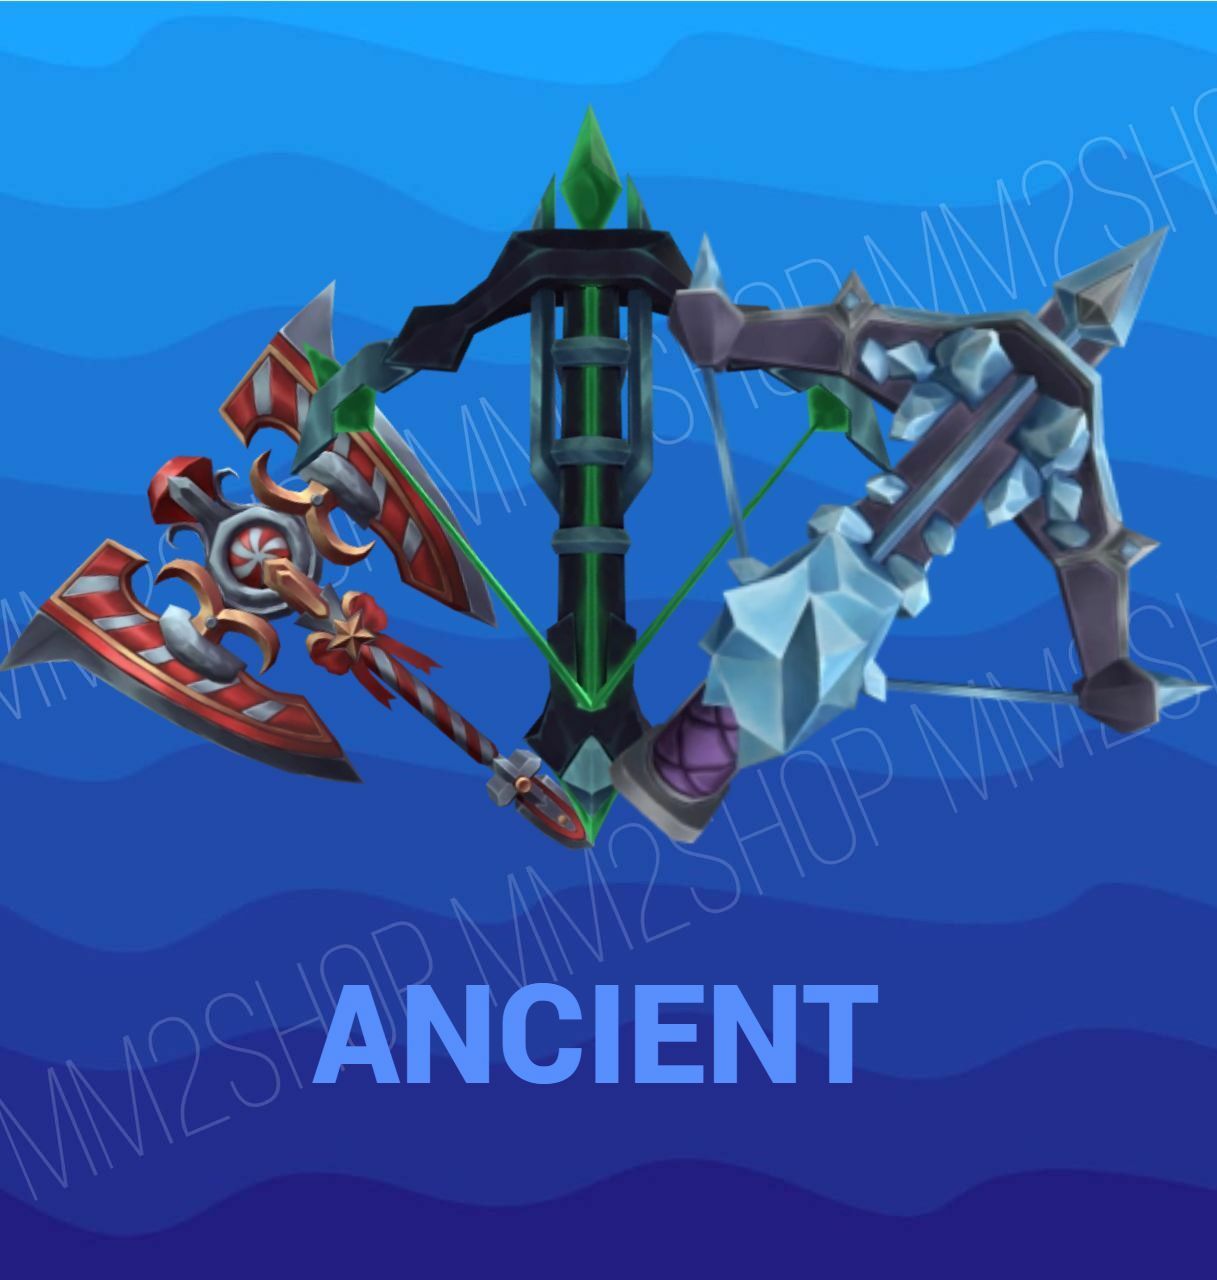 Mm2-roblox-murder Mystery 2 Godly Ancient Batwing Algeria